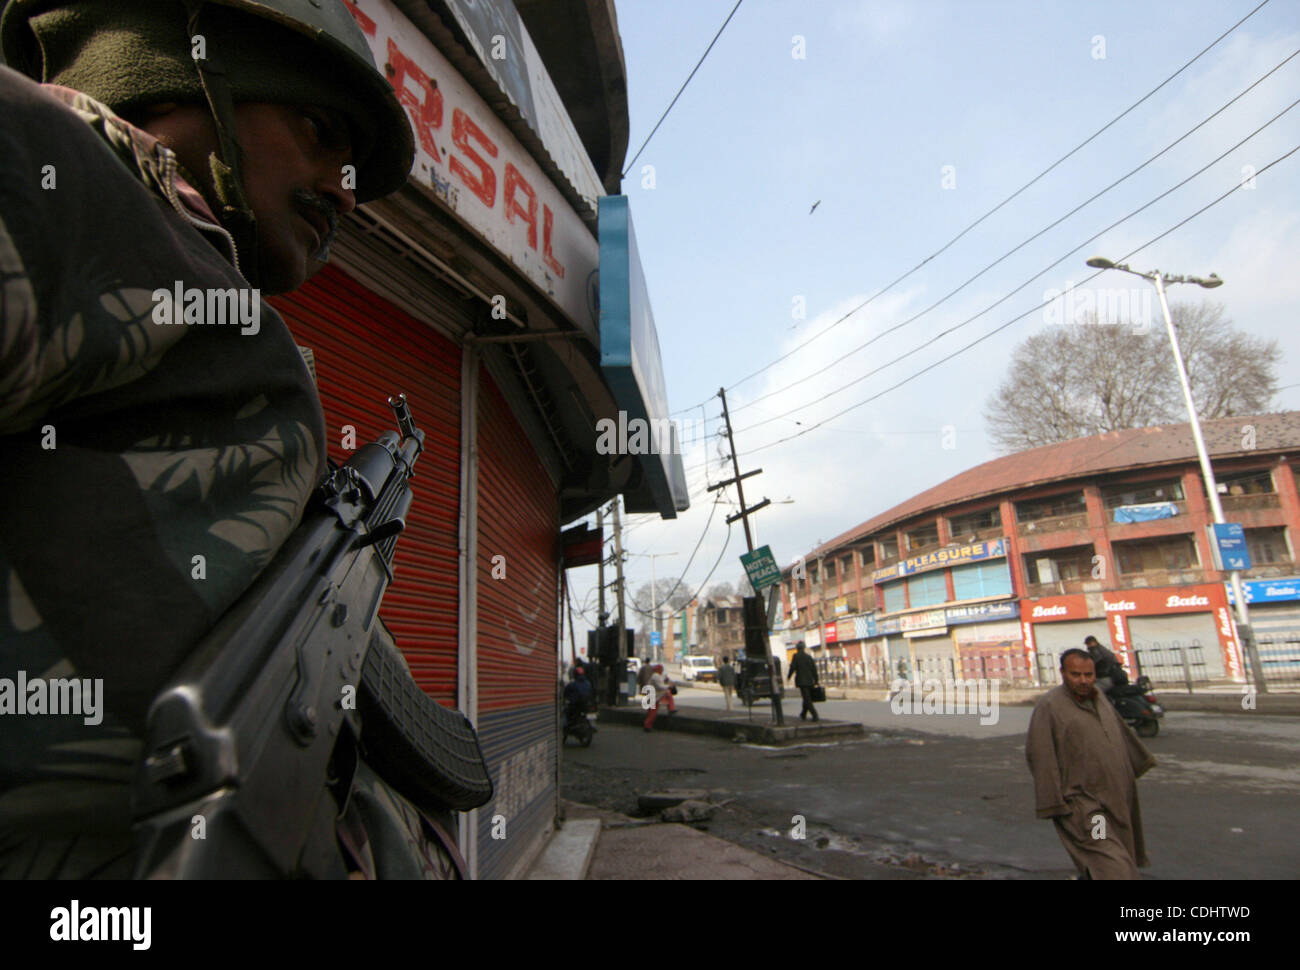 Feb 11, 2011 - Srinagar, Kashmir, India - Indian Central Reserve Police Force (CRPF) soldiers stand guard during a one day strike to mark the 27th death anniversary of Jammu and Kashmir Libration Front (JKLF) founder Maqbool Bhat in Srinagar the summer capital of Indian Kashmir. Kashmiri seperatist  Stock Photo